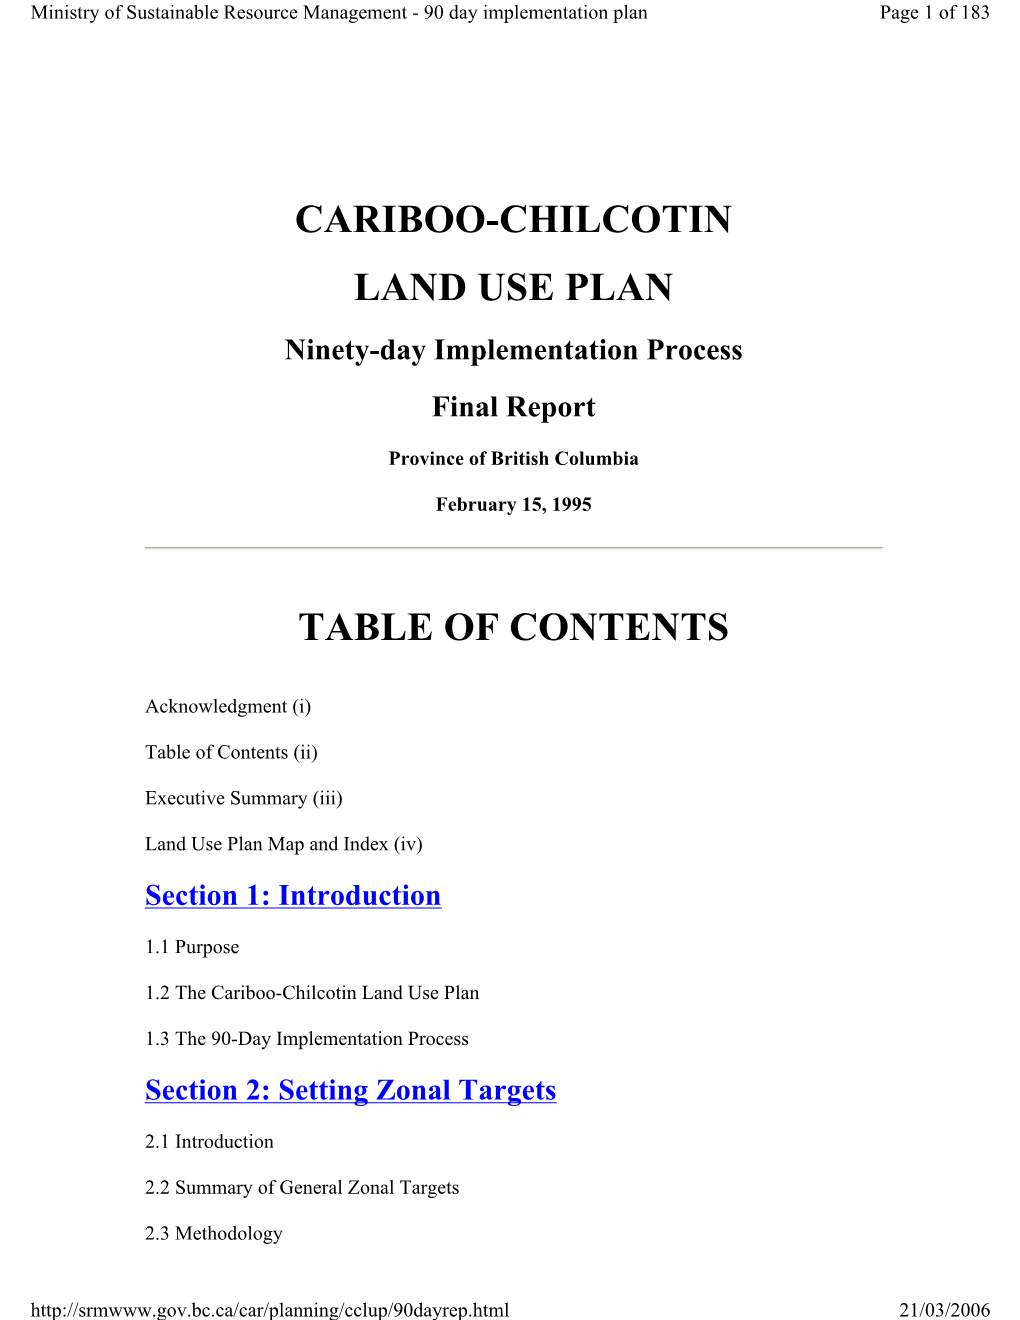 Cariboo-Chilcotin Land Use Plan Table of Contents